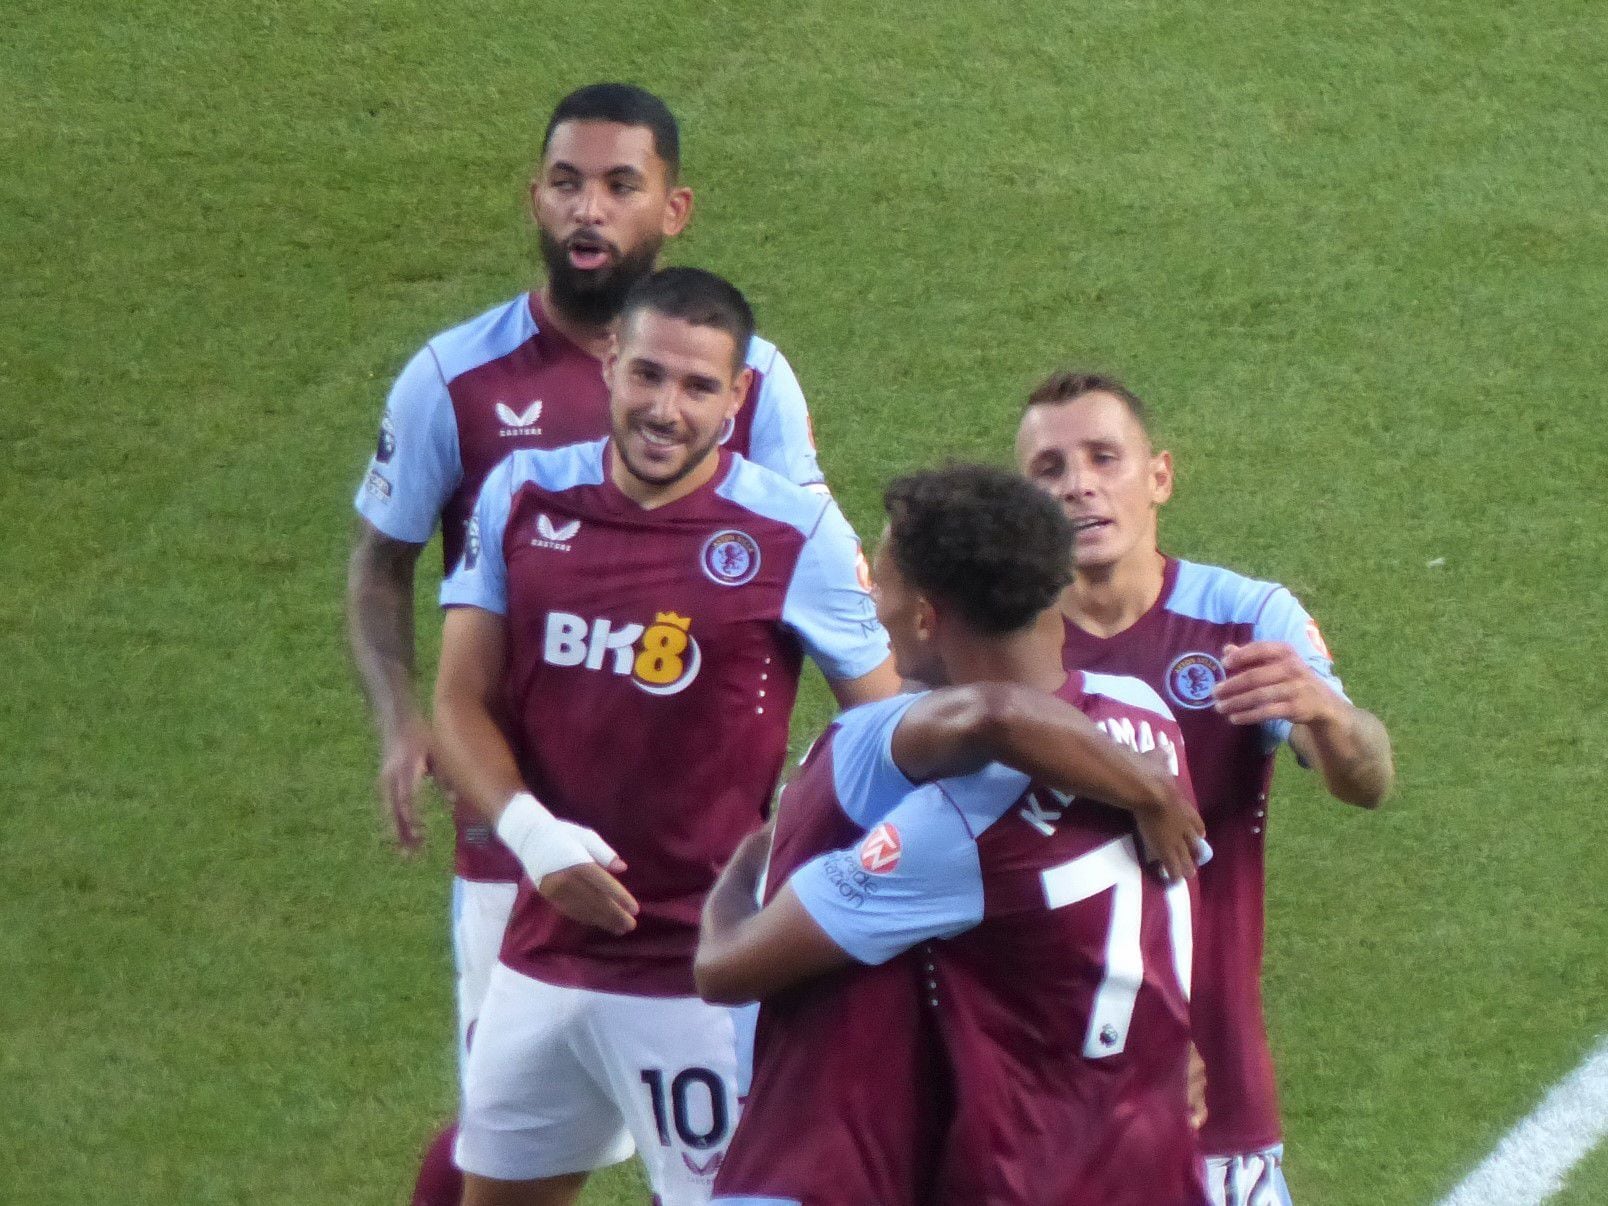 Unai Emery delighted to see Aston Villa playmaker back in action in US